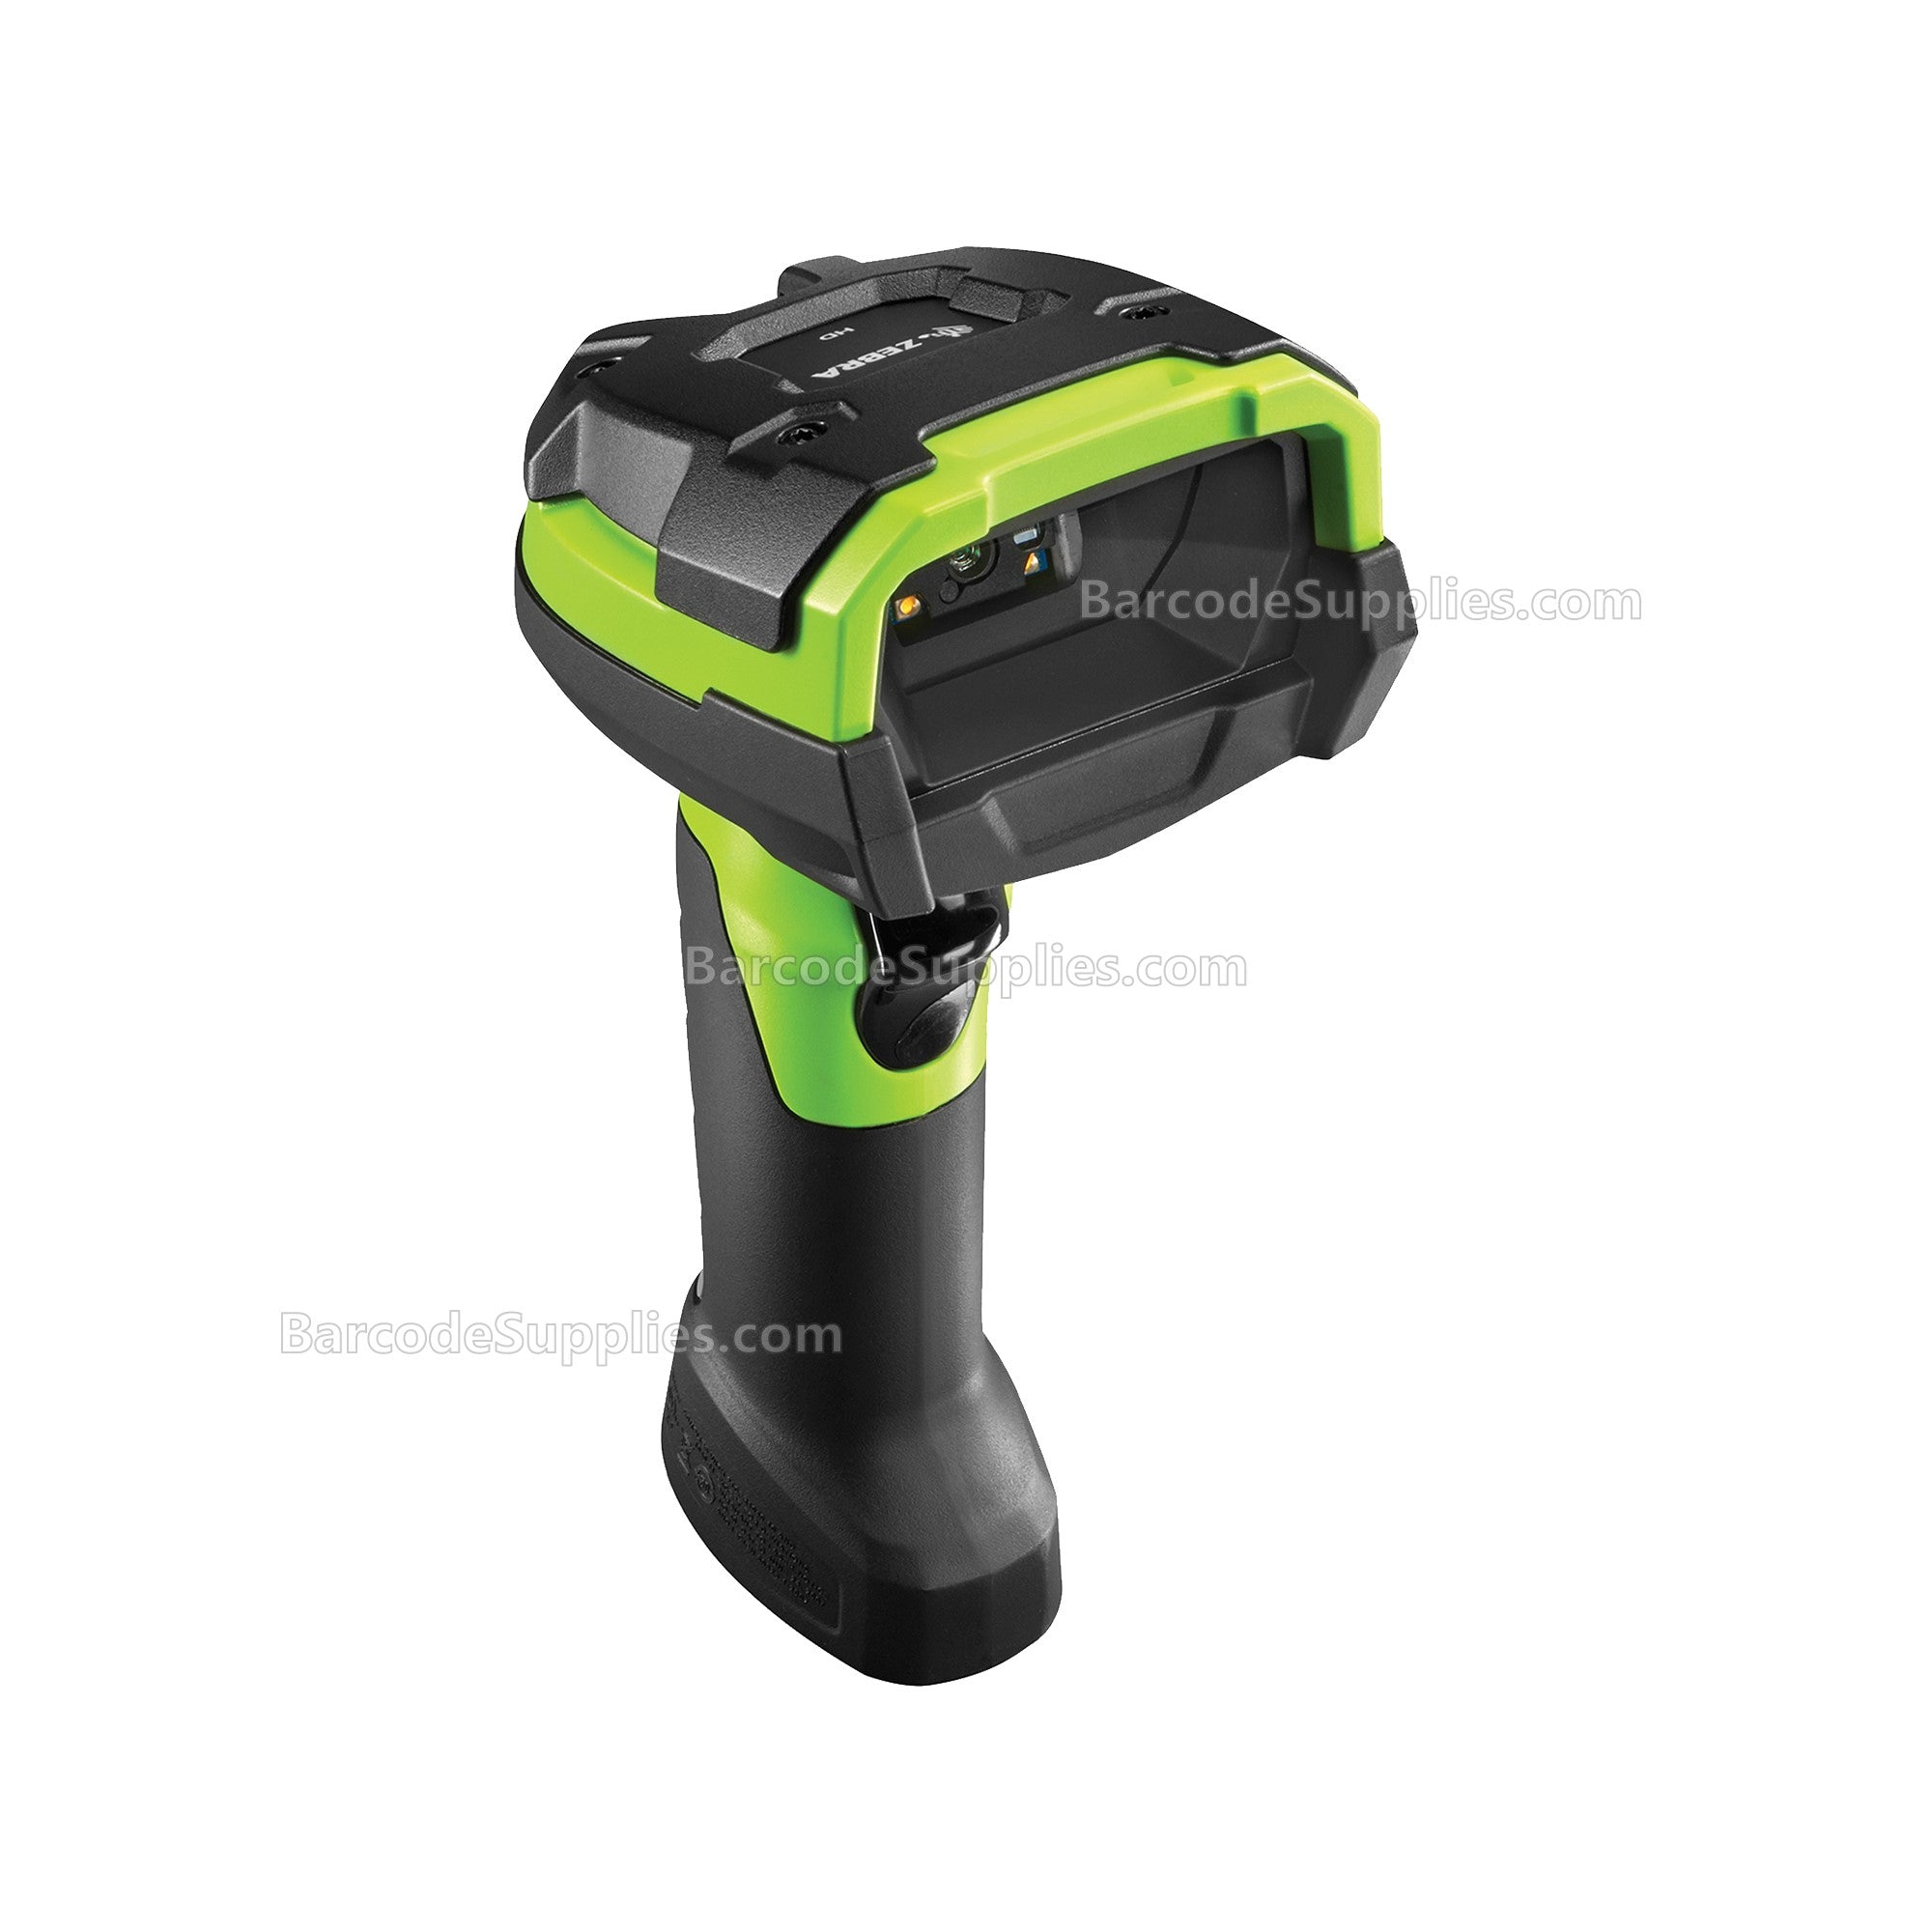 Zebra DS3678-HP Rugged Green Standard Cradle USB No Line Cord Kit: DS3678-HP2F003VZWW Scanner, CBA-U42-S07PAR Shielded USB Cable Supports 12V P/S, STB3678-C100F3WW Cradle, PWR-BGA12V50W0WW Power Supply and CBL-DC-451A1-01 DC Line Cord